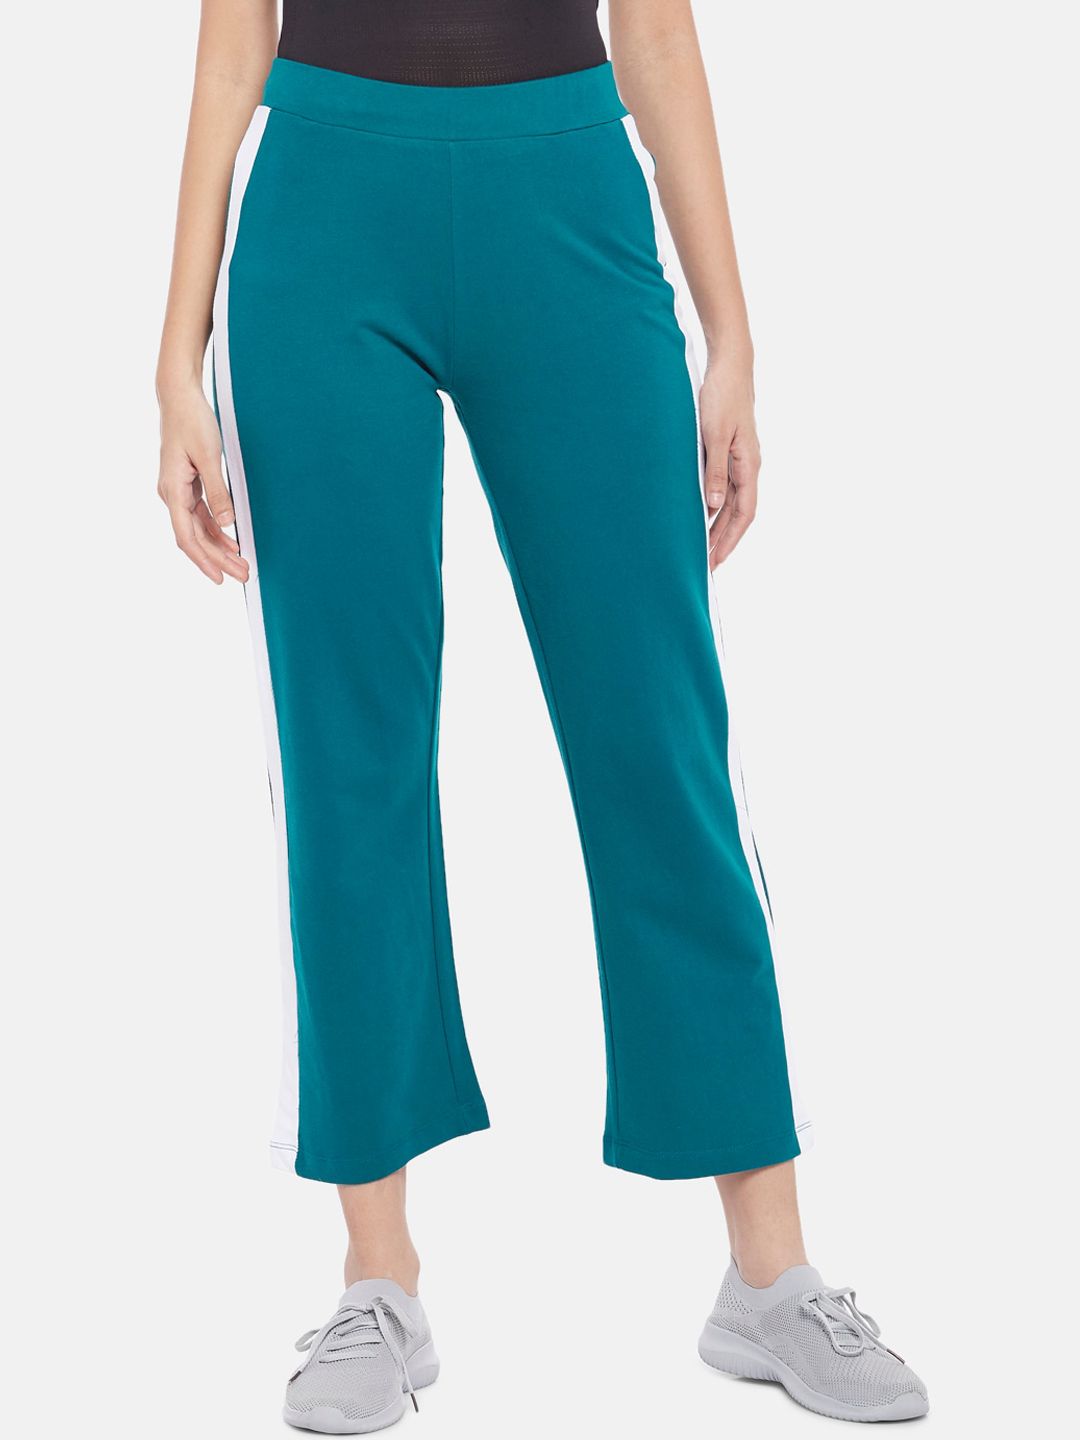 Ajile by Pantaloons Women Teal Green Solid Pure Cotton Track Pants Price in India